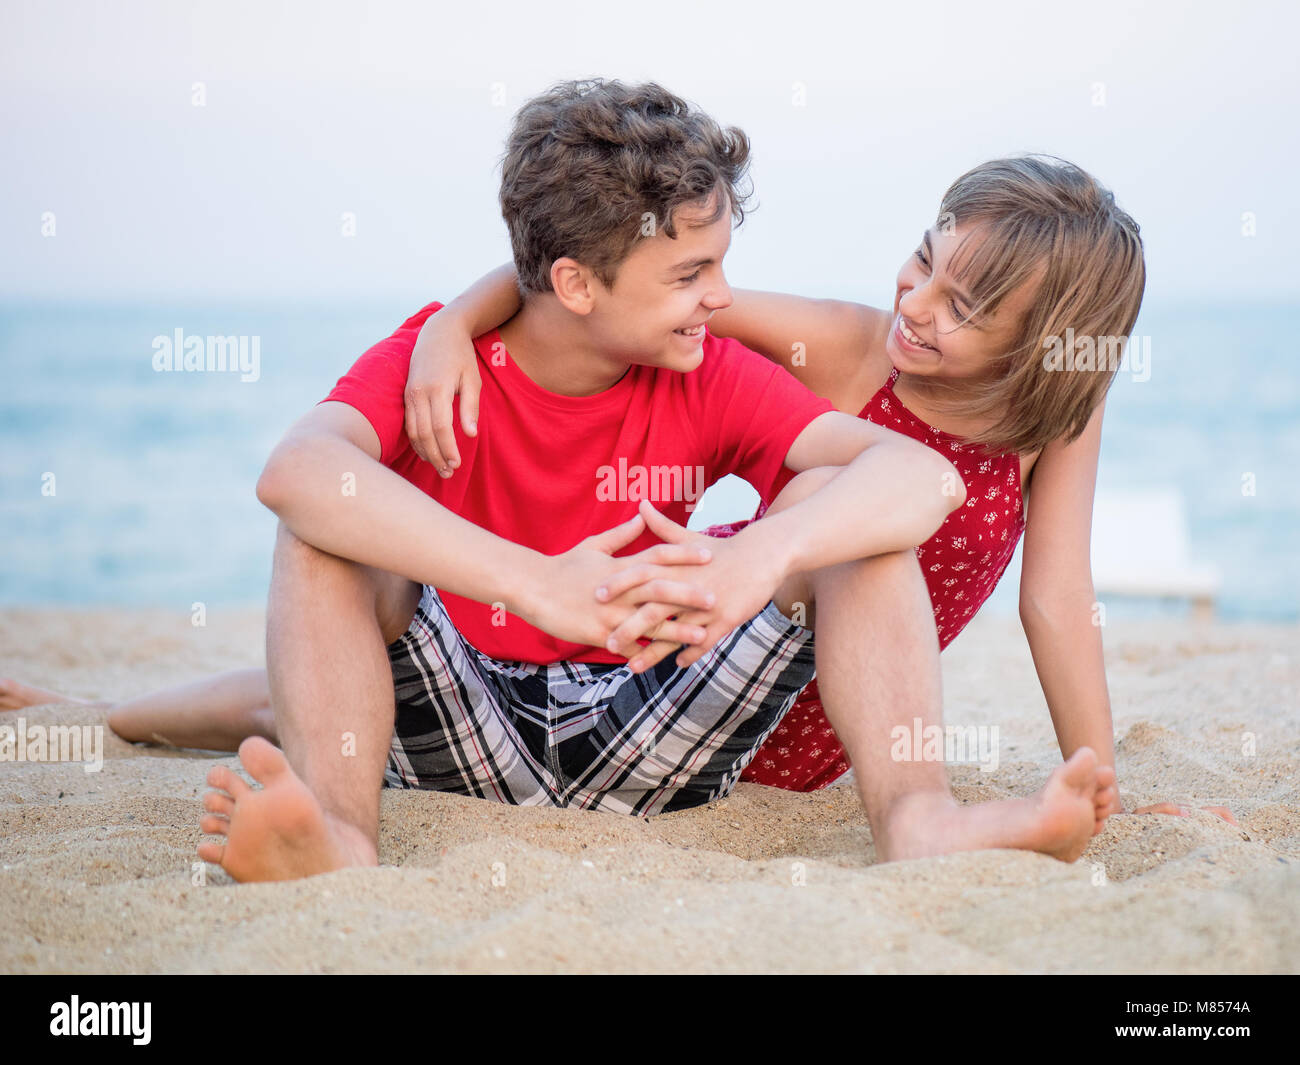 Brother and sister playing on beach Stock Photo